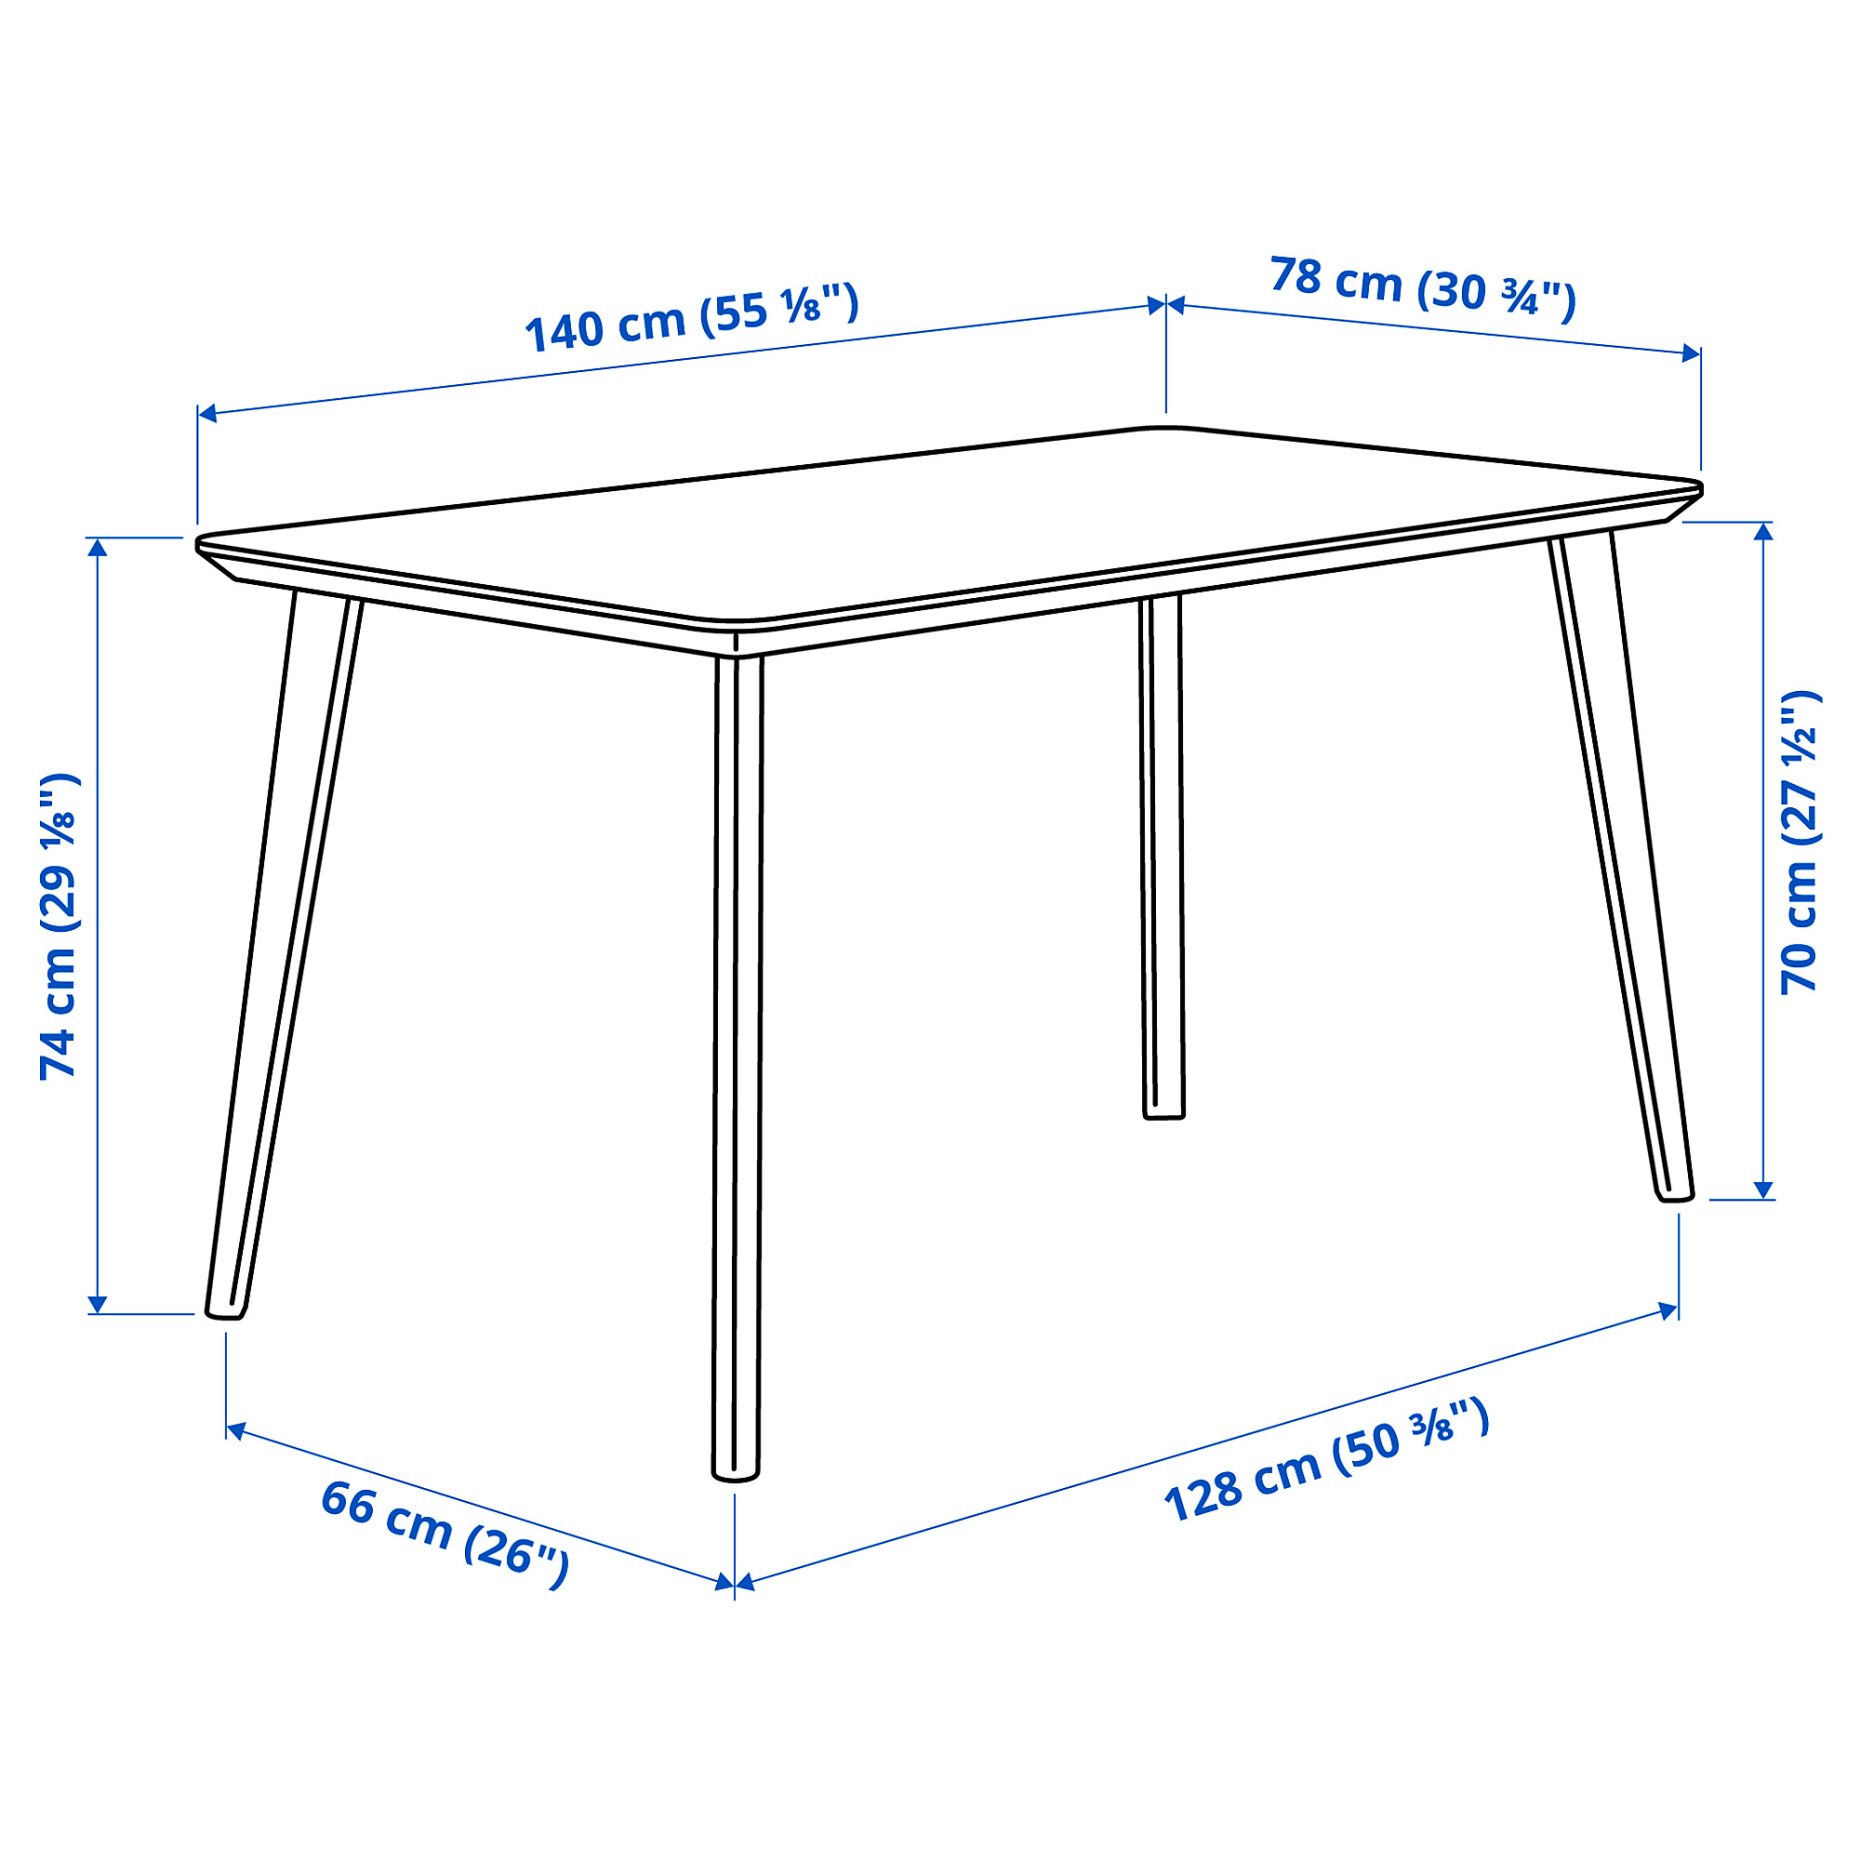 LISABO/KRYLBO, table and 4 chairs, 140 cm, 995.355.45